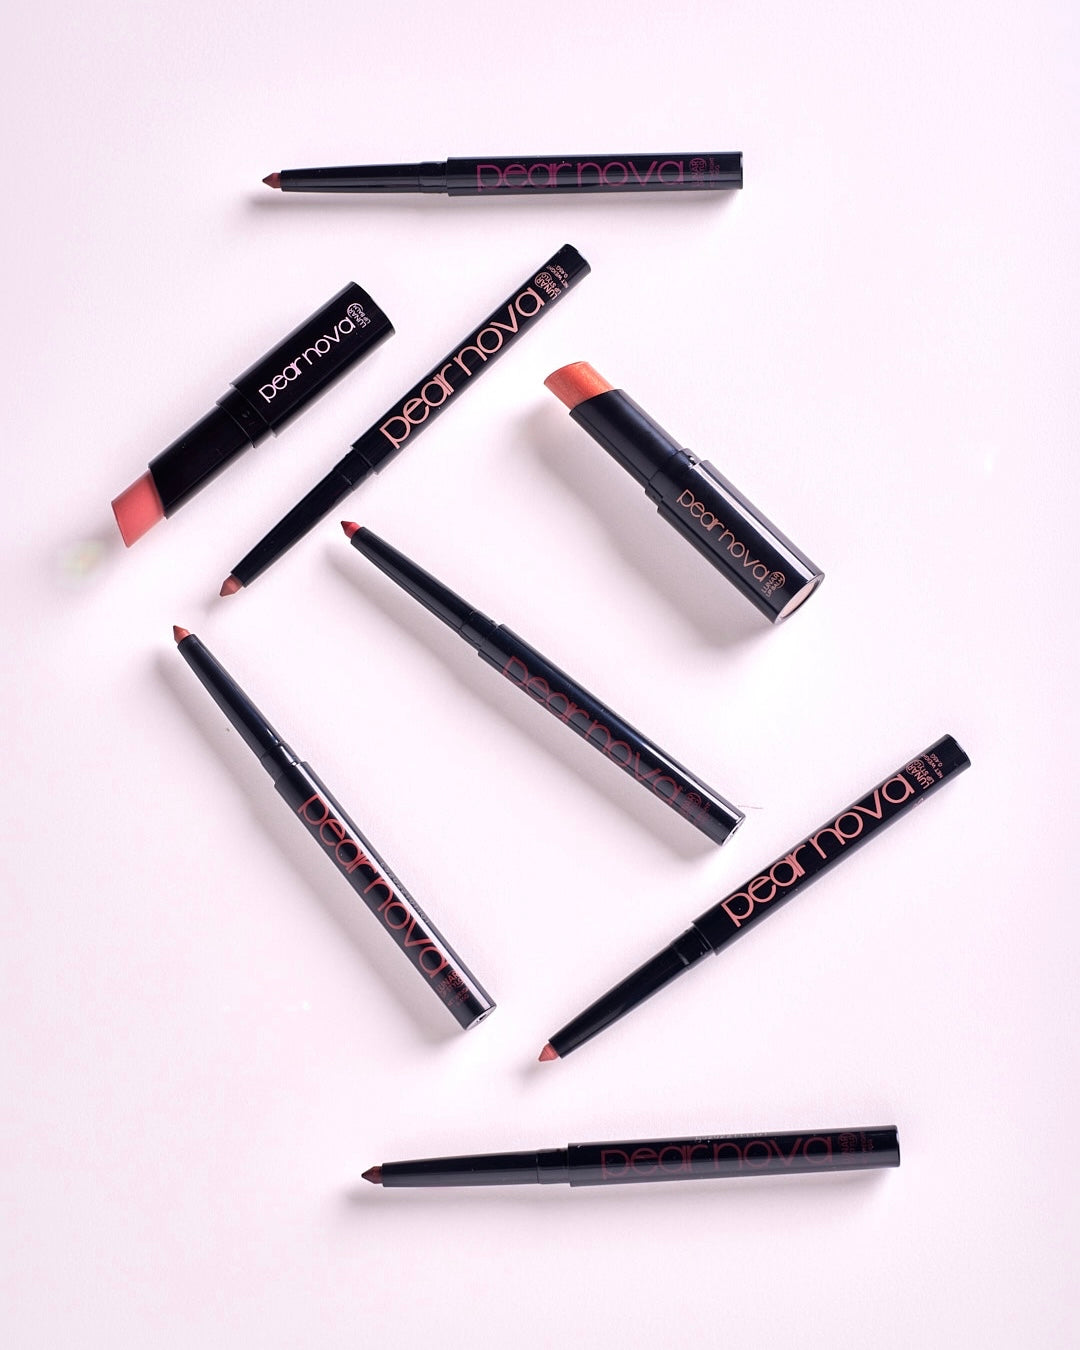 All products in the lip stylo + lip balm bundle including 2 lip balms and 6 lip liners